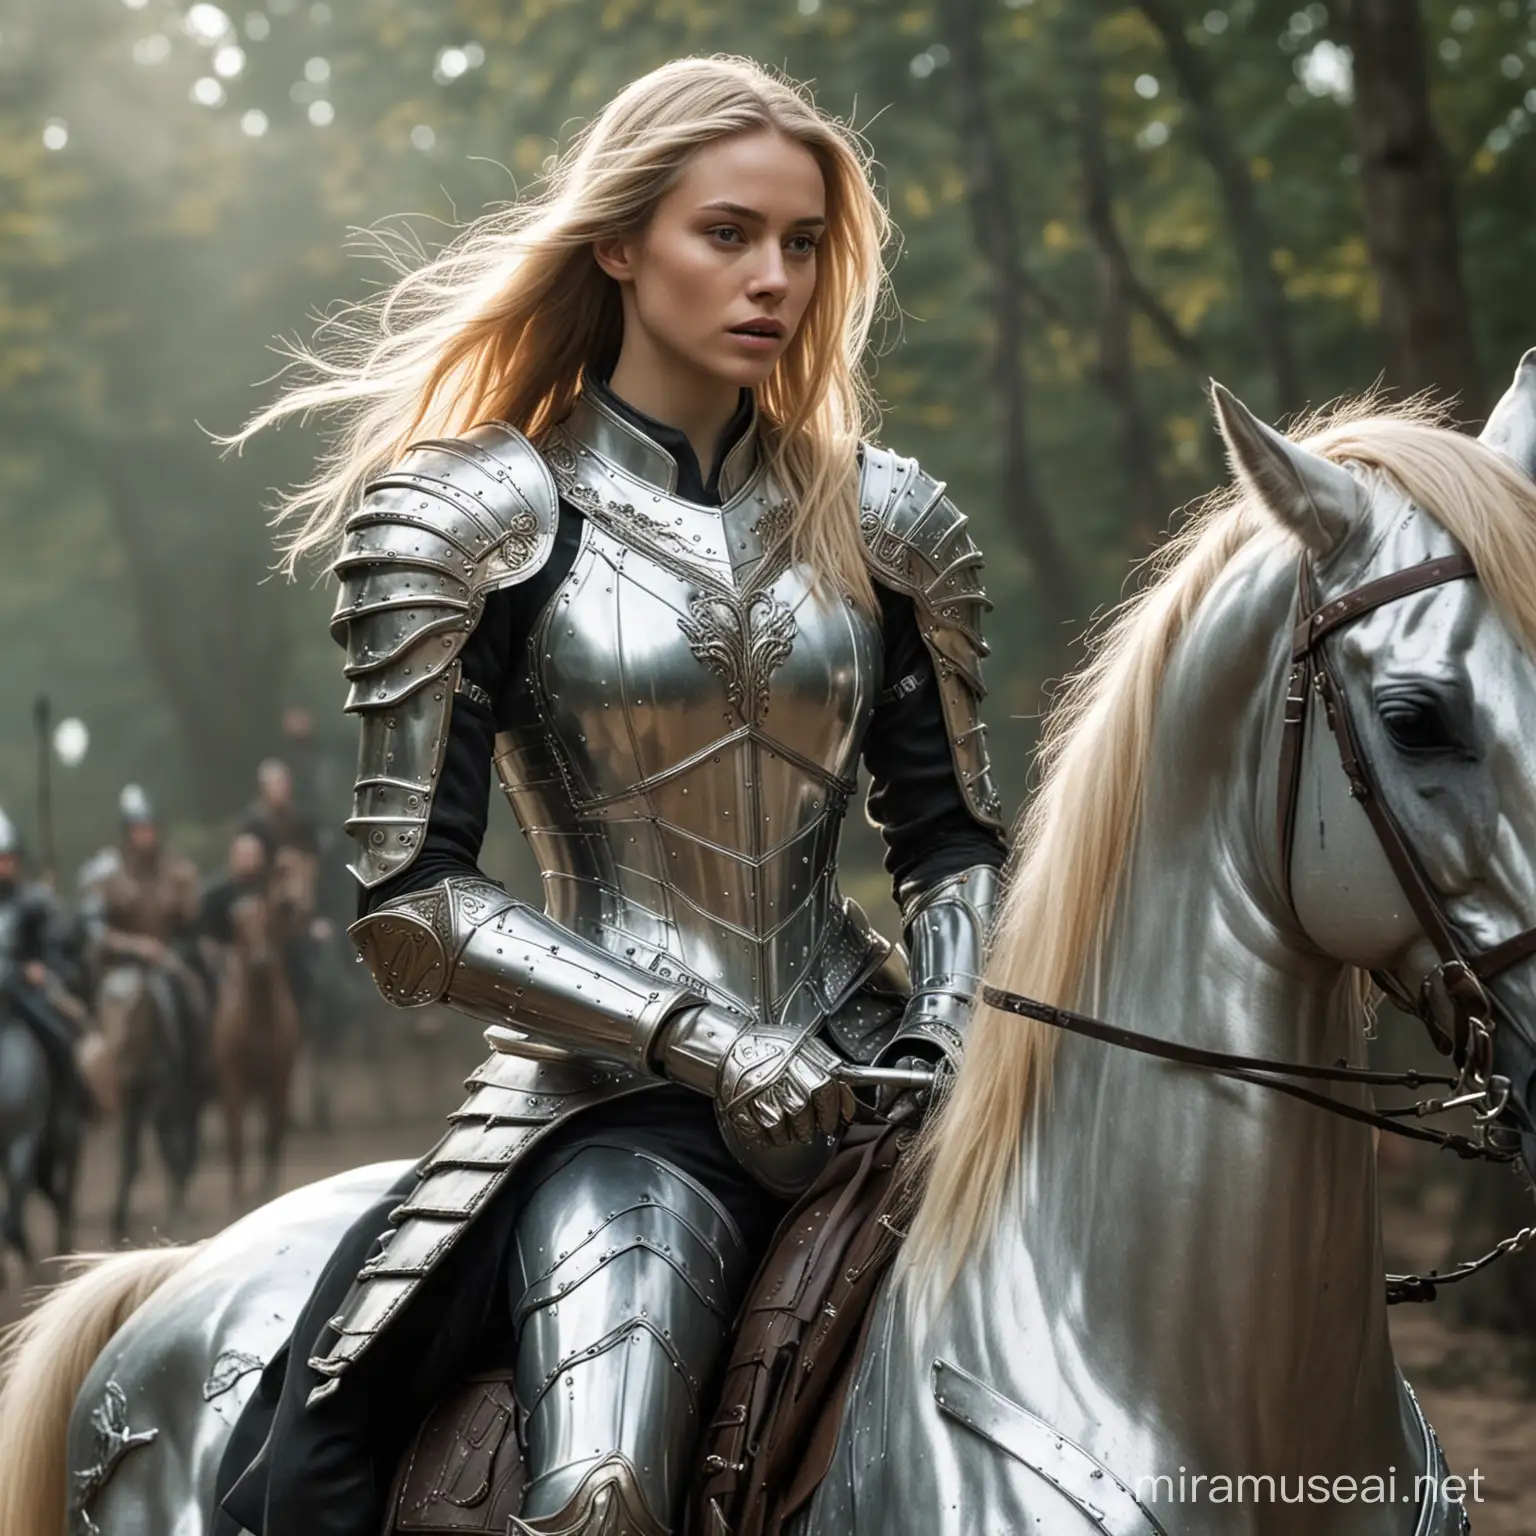 Brave Blonde Knight on Armored Steed Succumbs to Fatal Arrow Wound